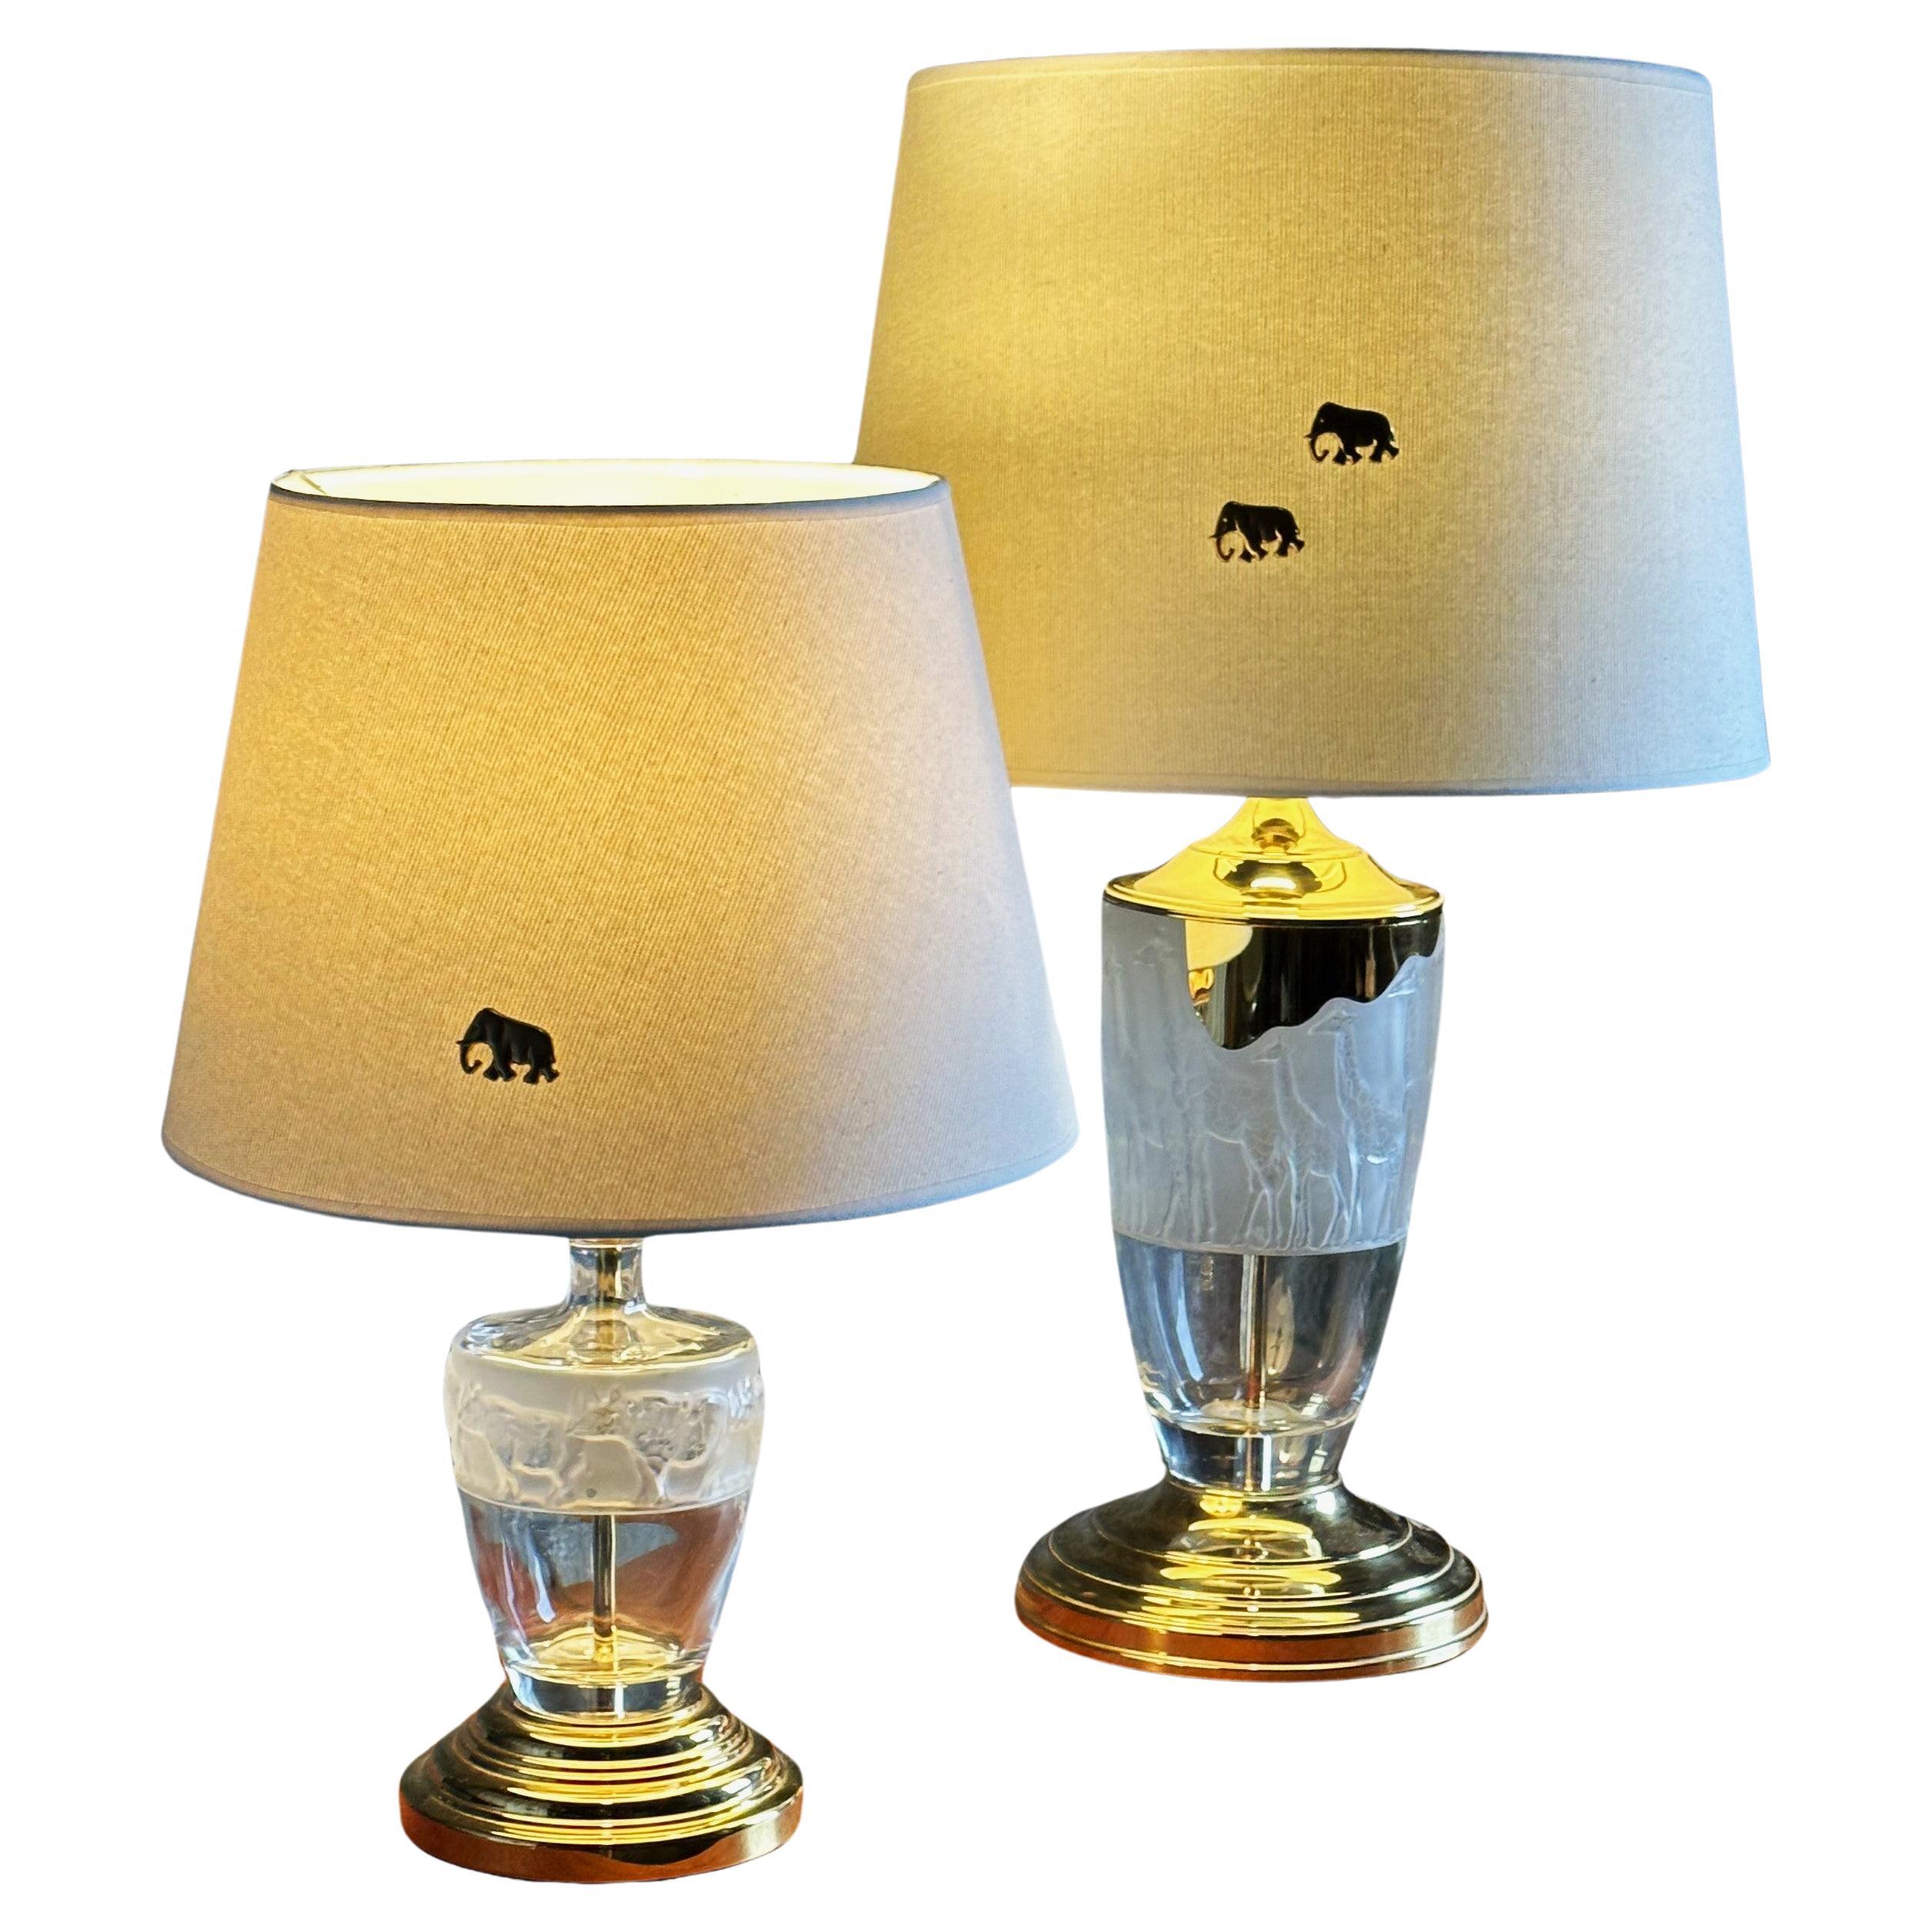 Pair of Midcentury Murano Table Lamps, Africa Design, Brass. Italy 1960s For Sale